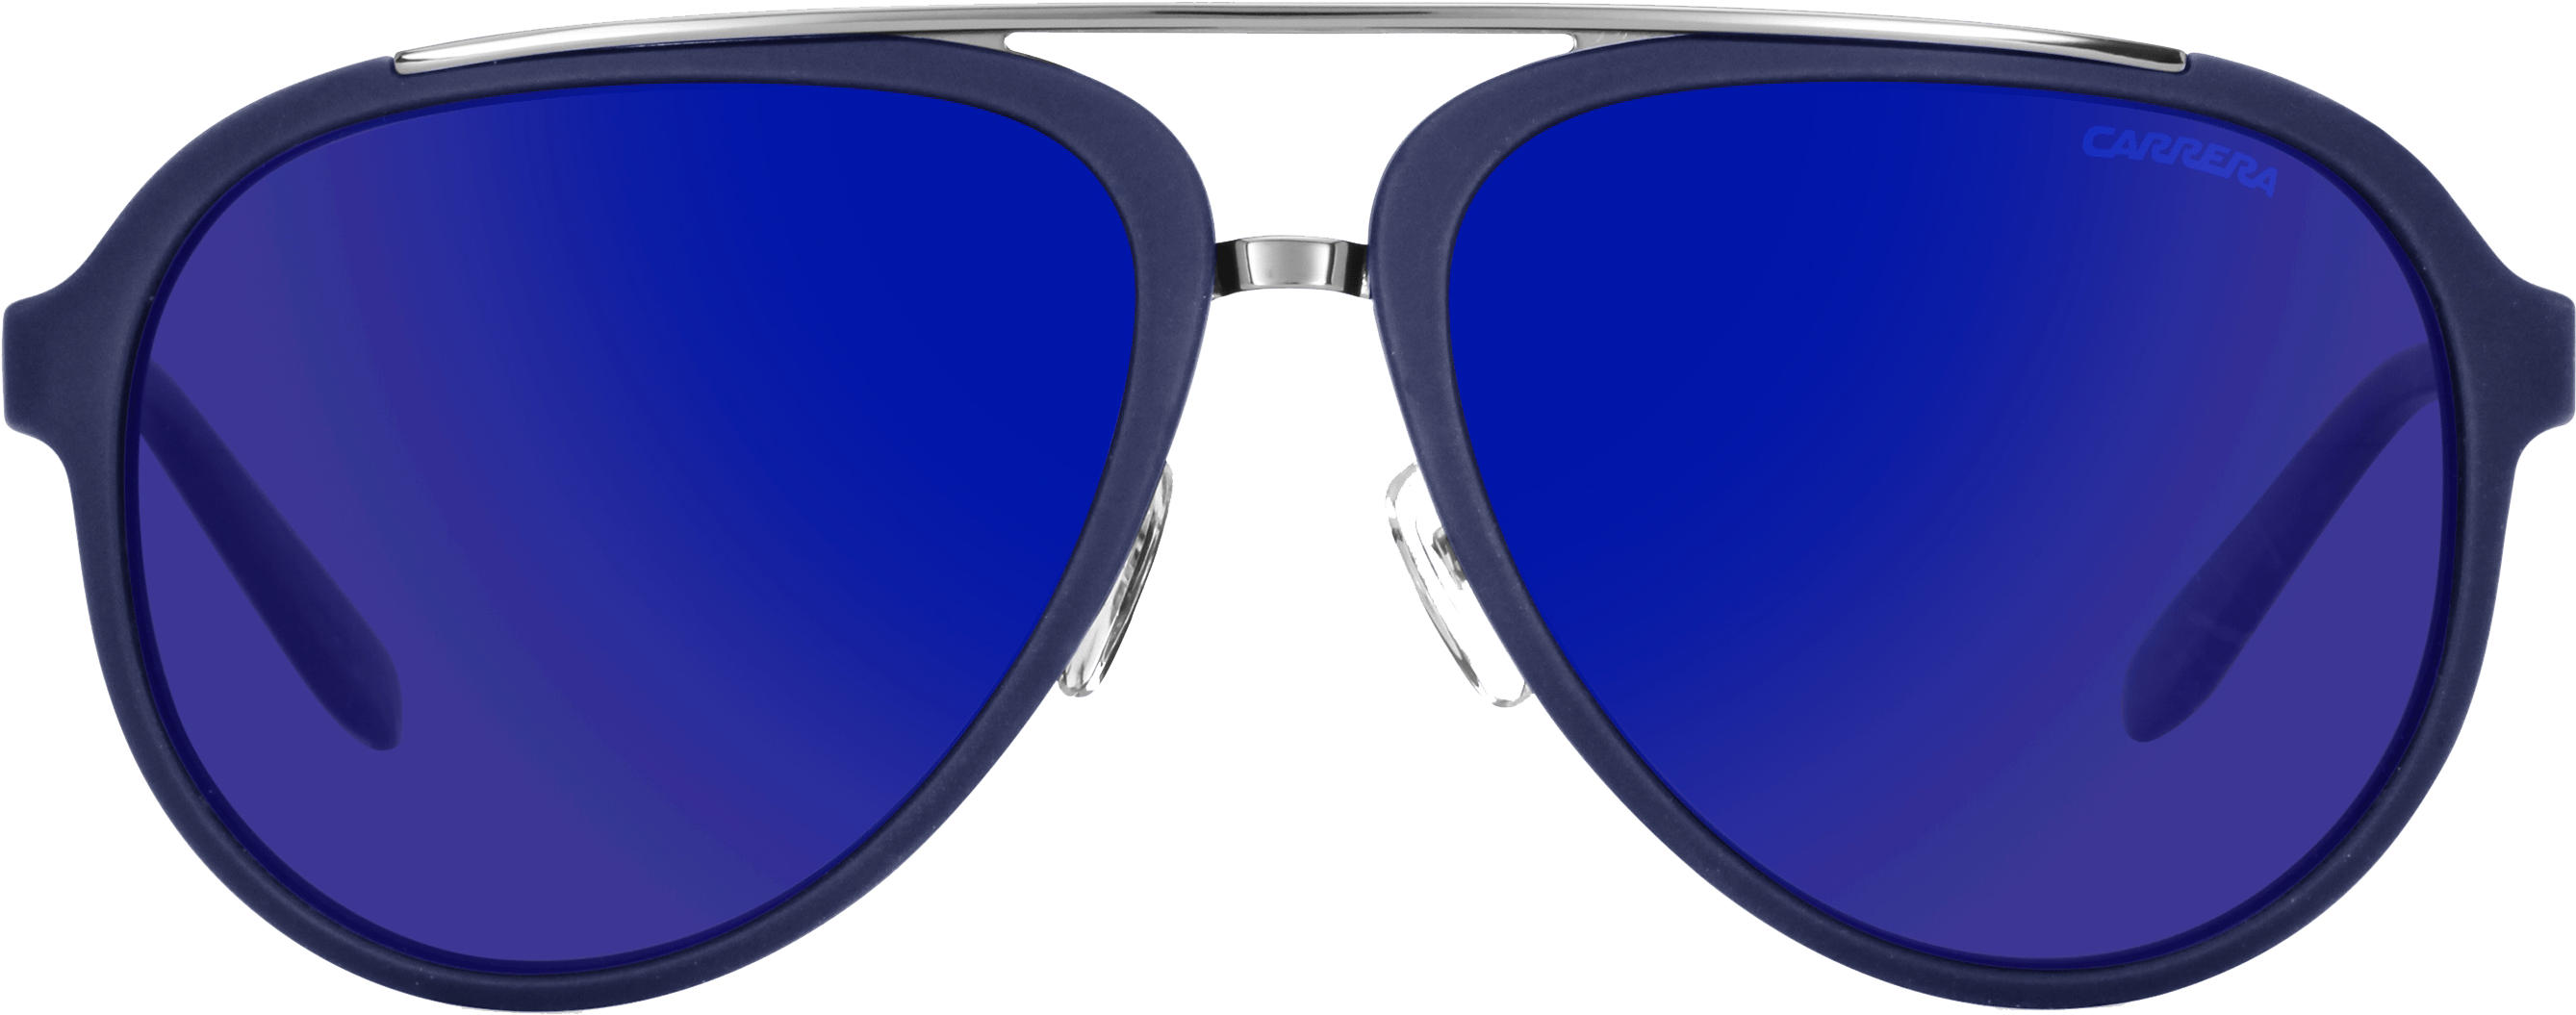 Sunglasses Png Sunglasses Png - Reflection (3072x1886), Png Download